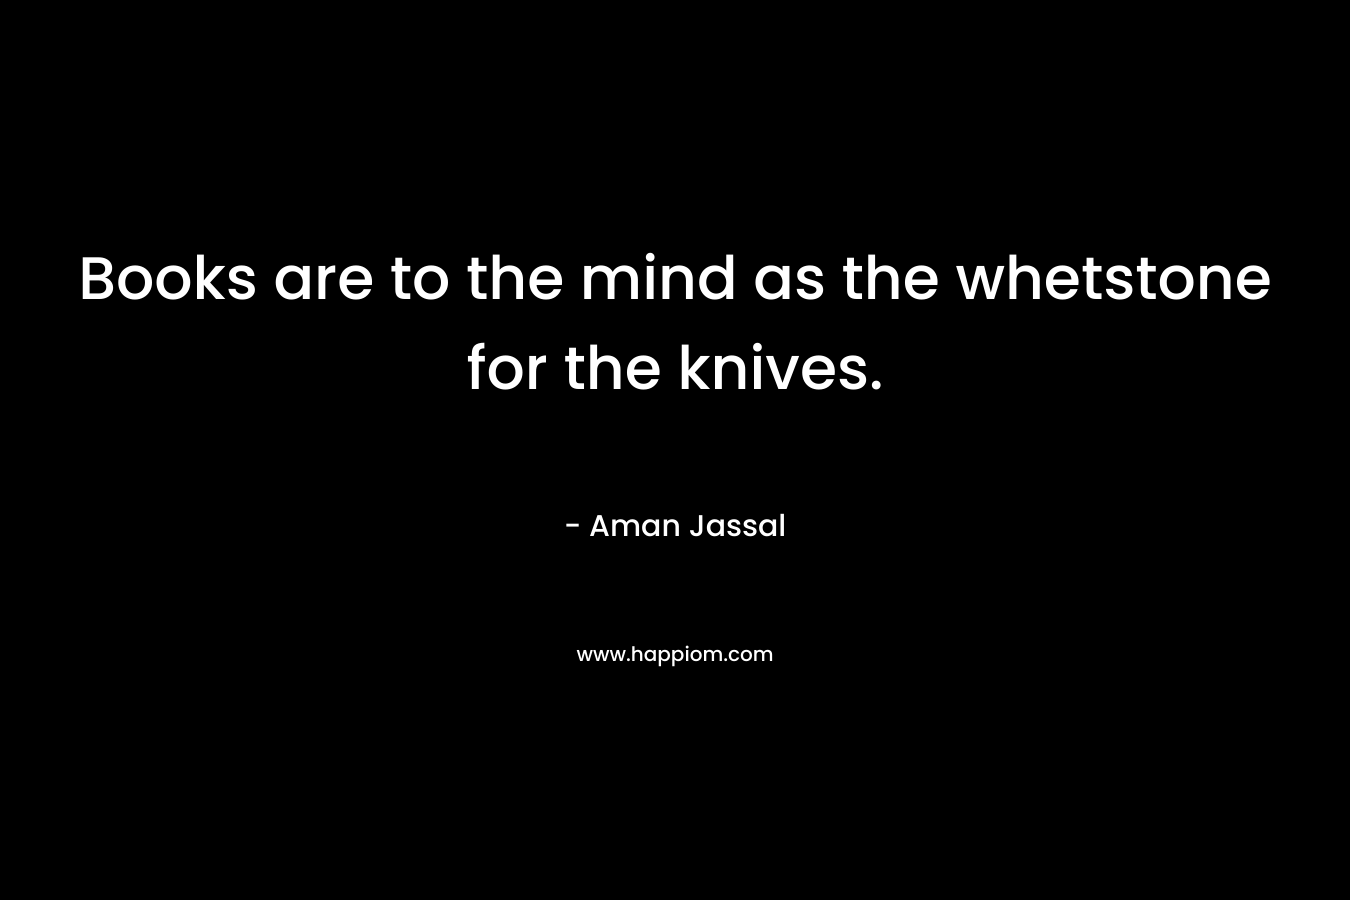 Books are to the mind as the whetstone for the knives.